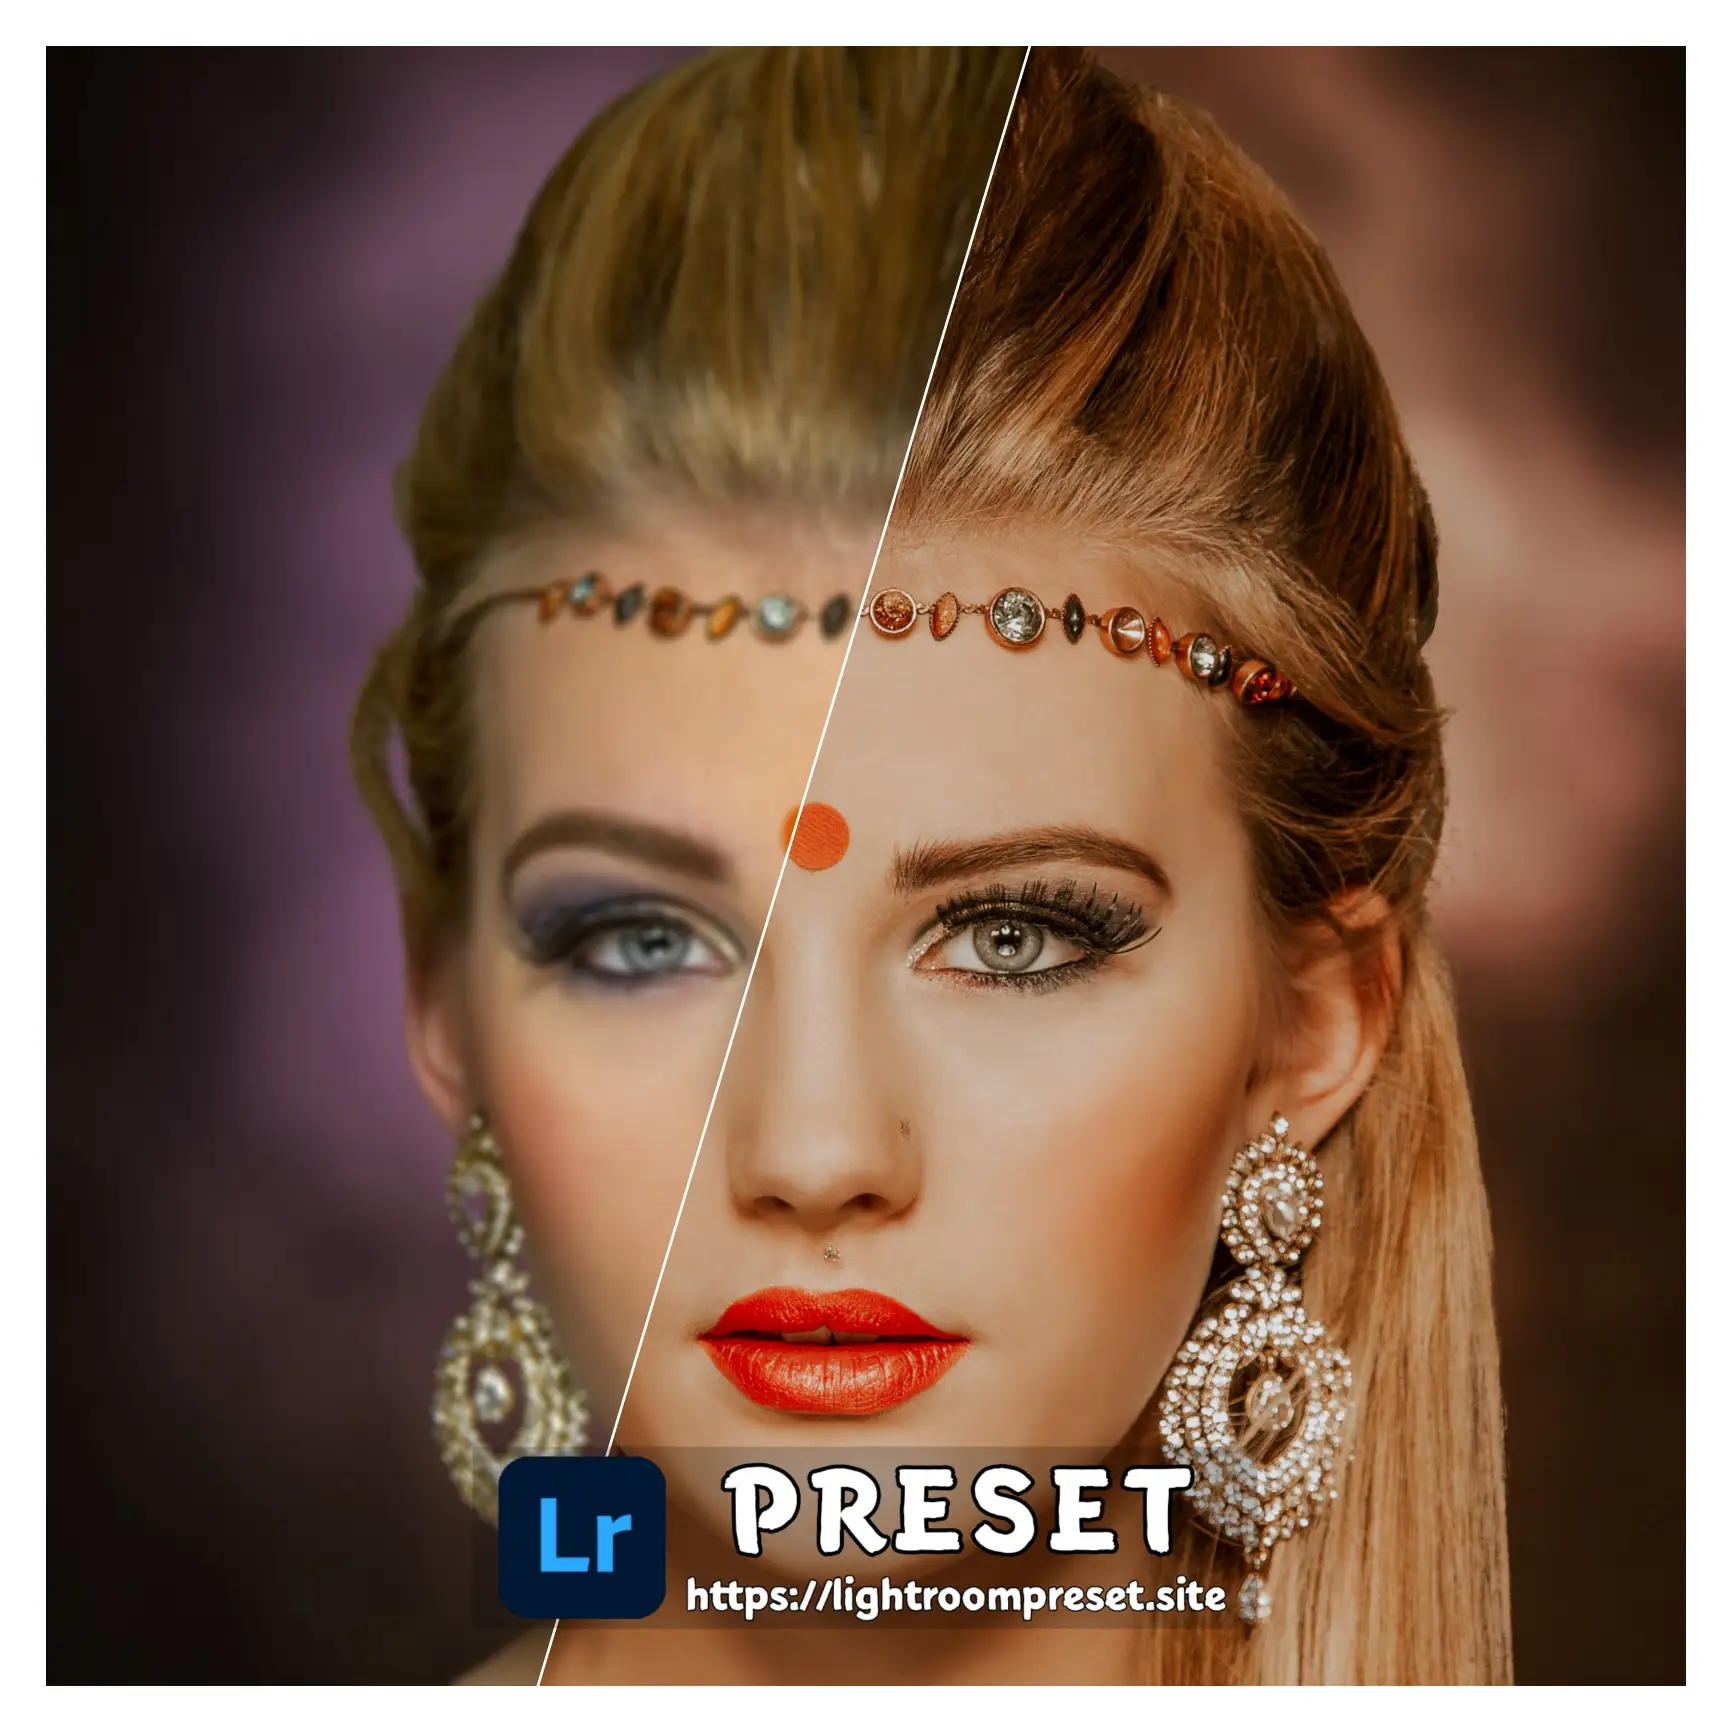 You are currently viewing Lightroom presets download hd